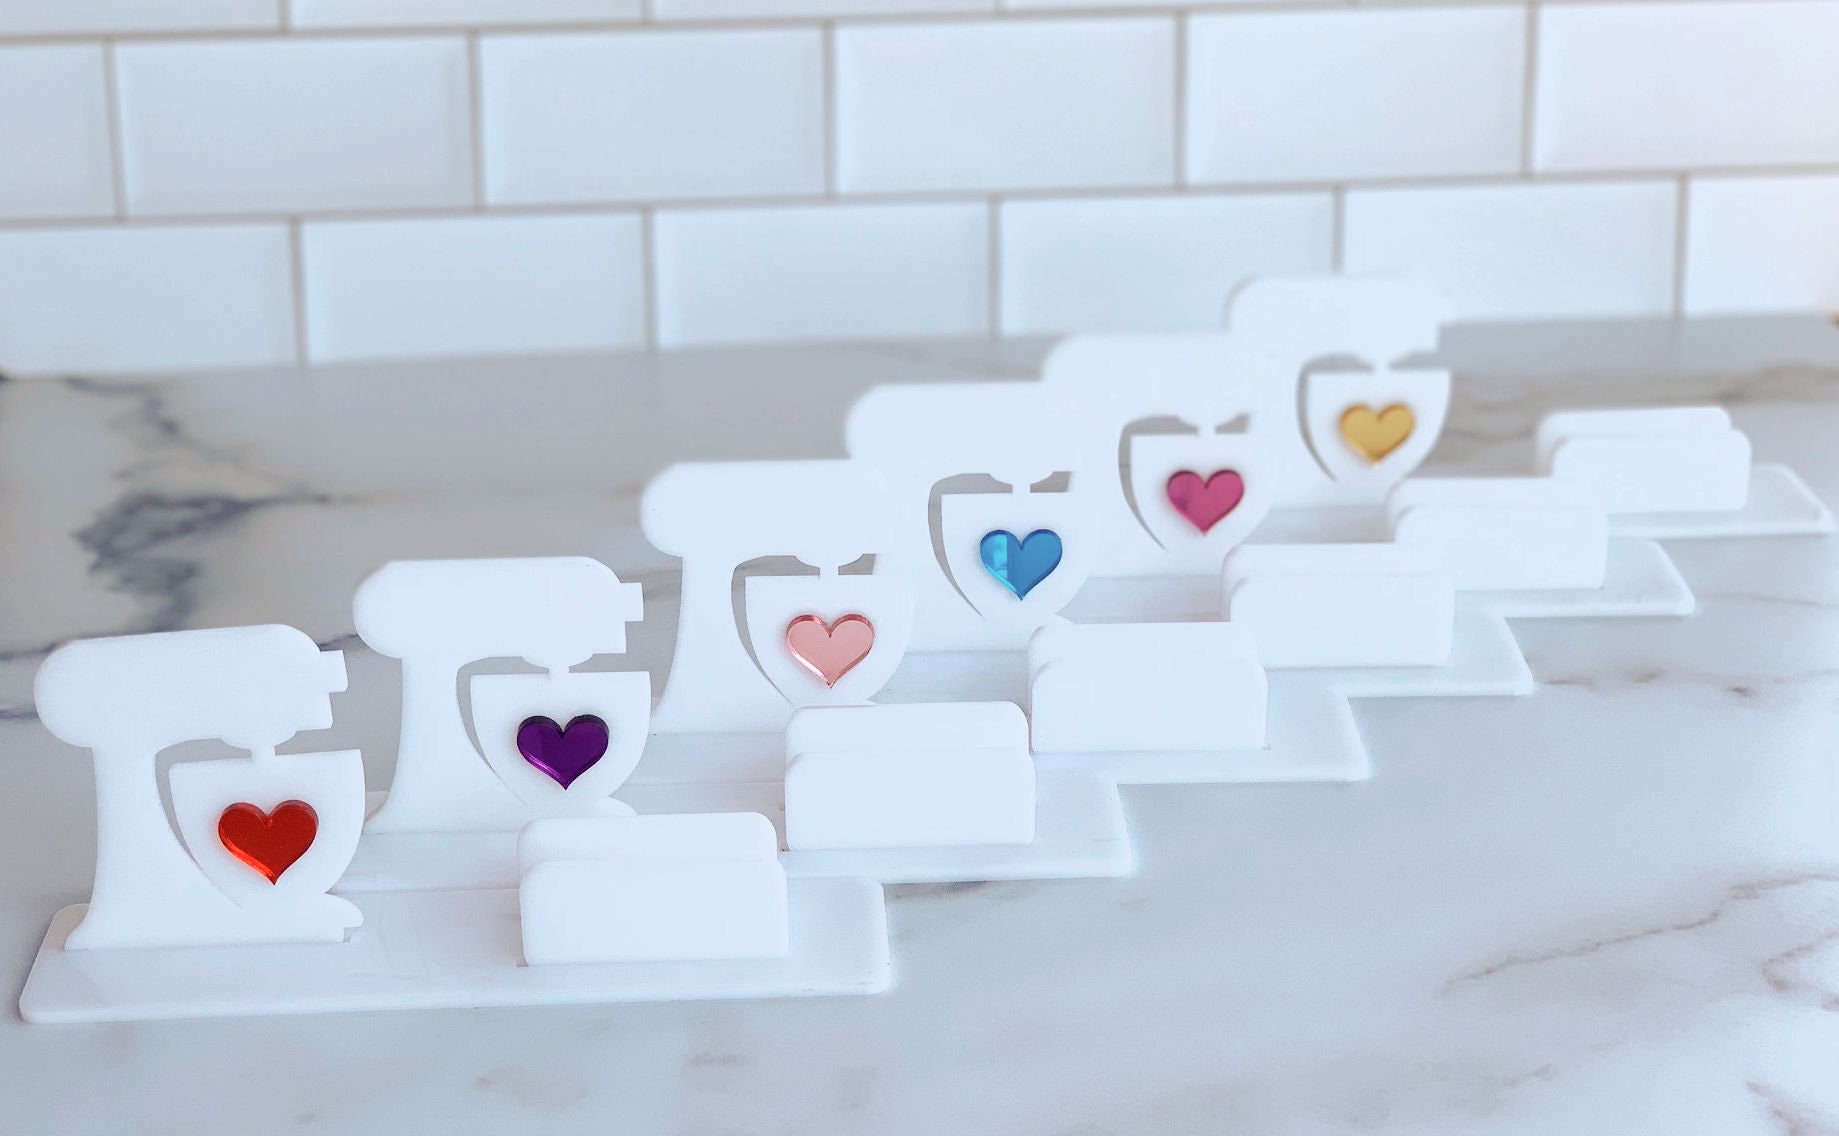 Heart Business Cards - Etsy